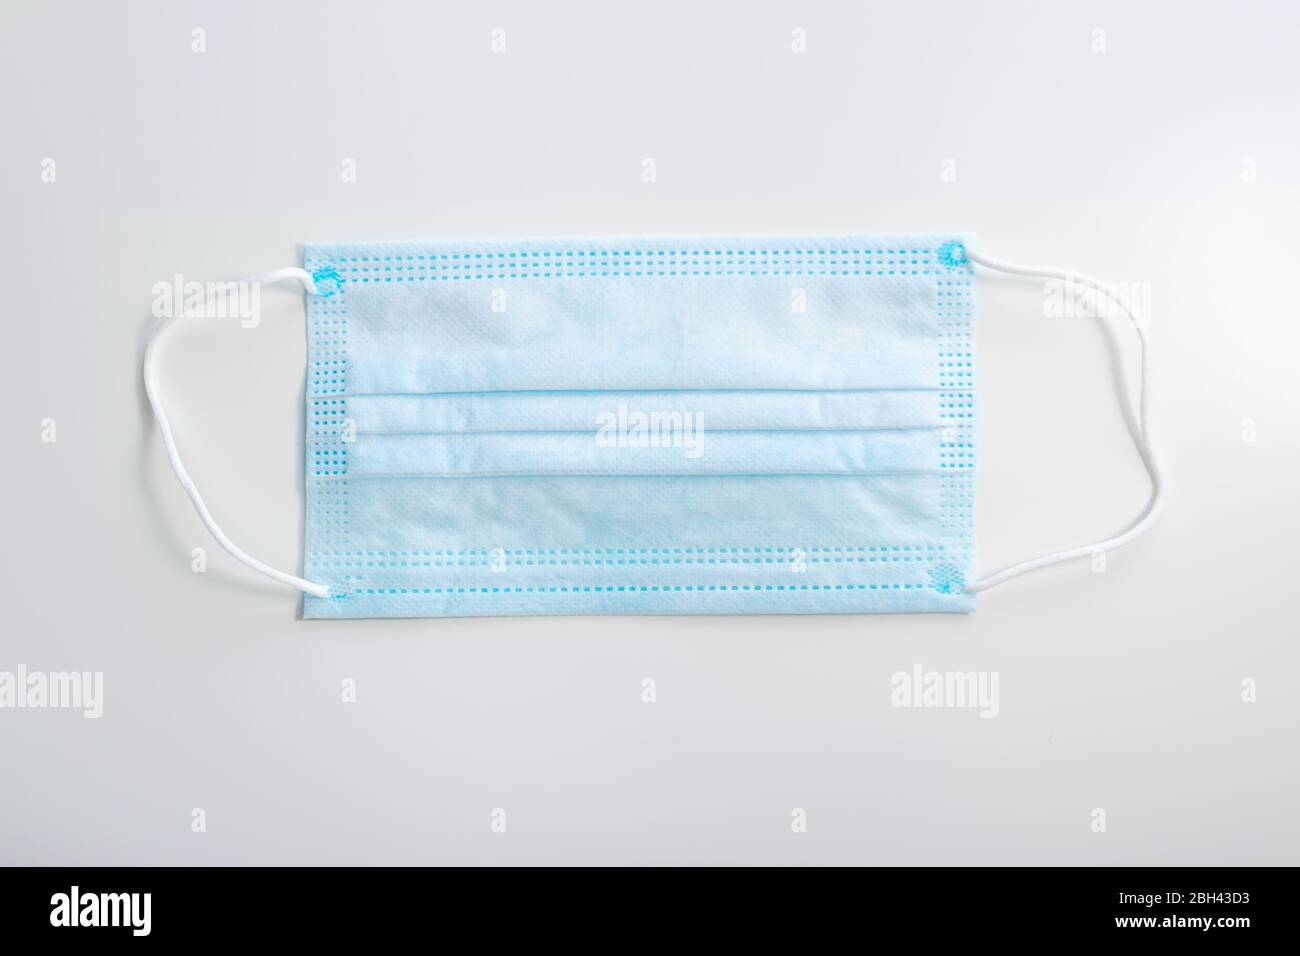 Corona protection medical mask on white background. Face mask protection against pollution, virus, flu. Stock Photo